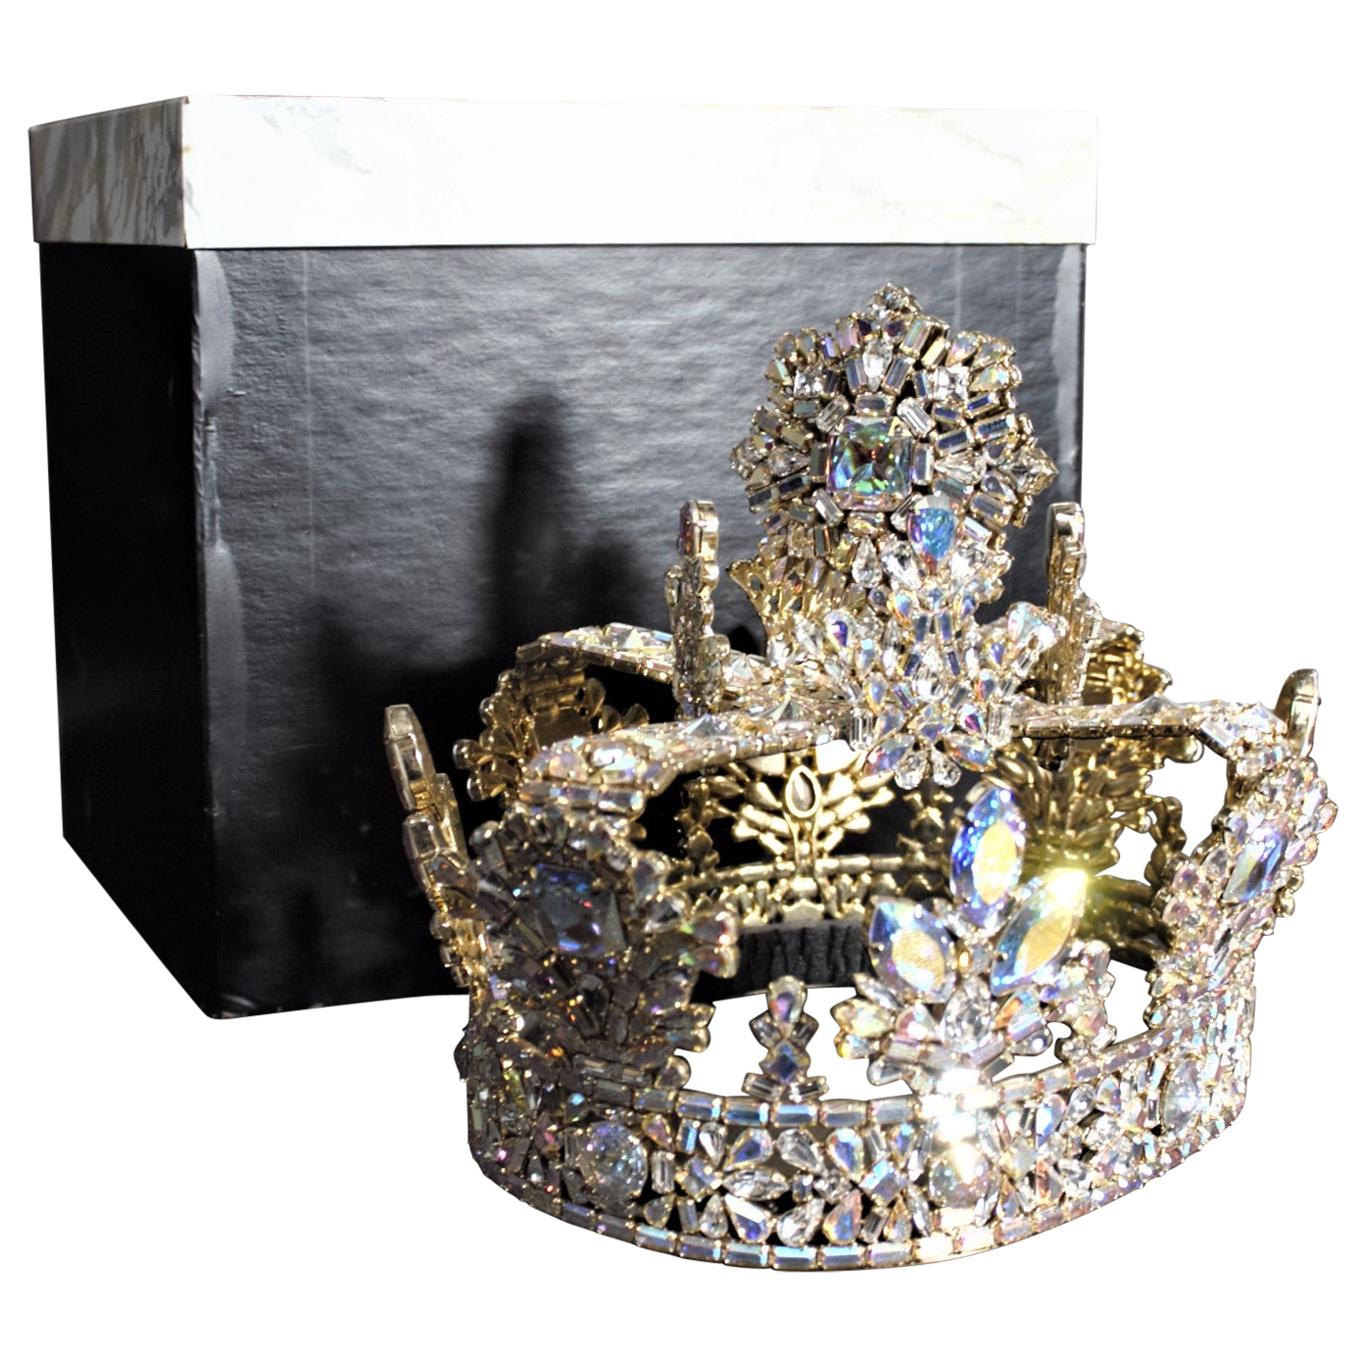 This full sized and very elaborate rhinestone crown is completely unsigned, but presumed to have been made in Canada in circa 1975 in a Victorian or Edwardian style. The crown is composed of a series of literally hundreds of clear Aurora borealis